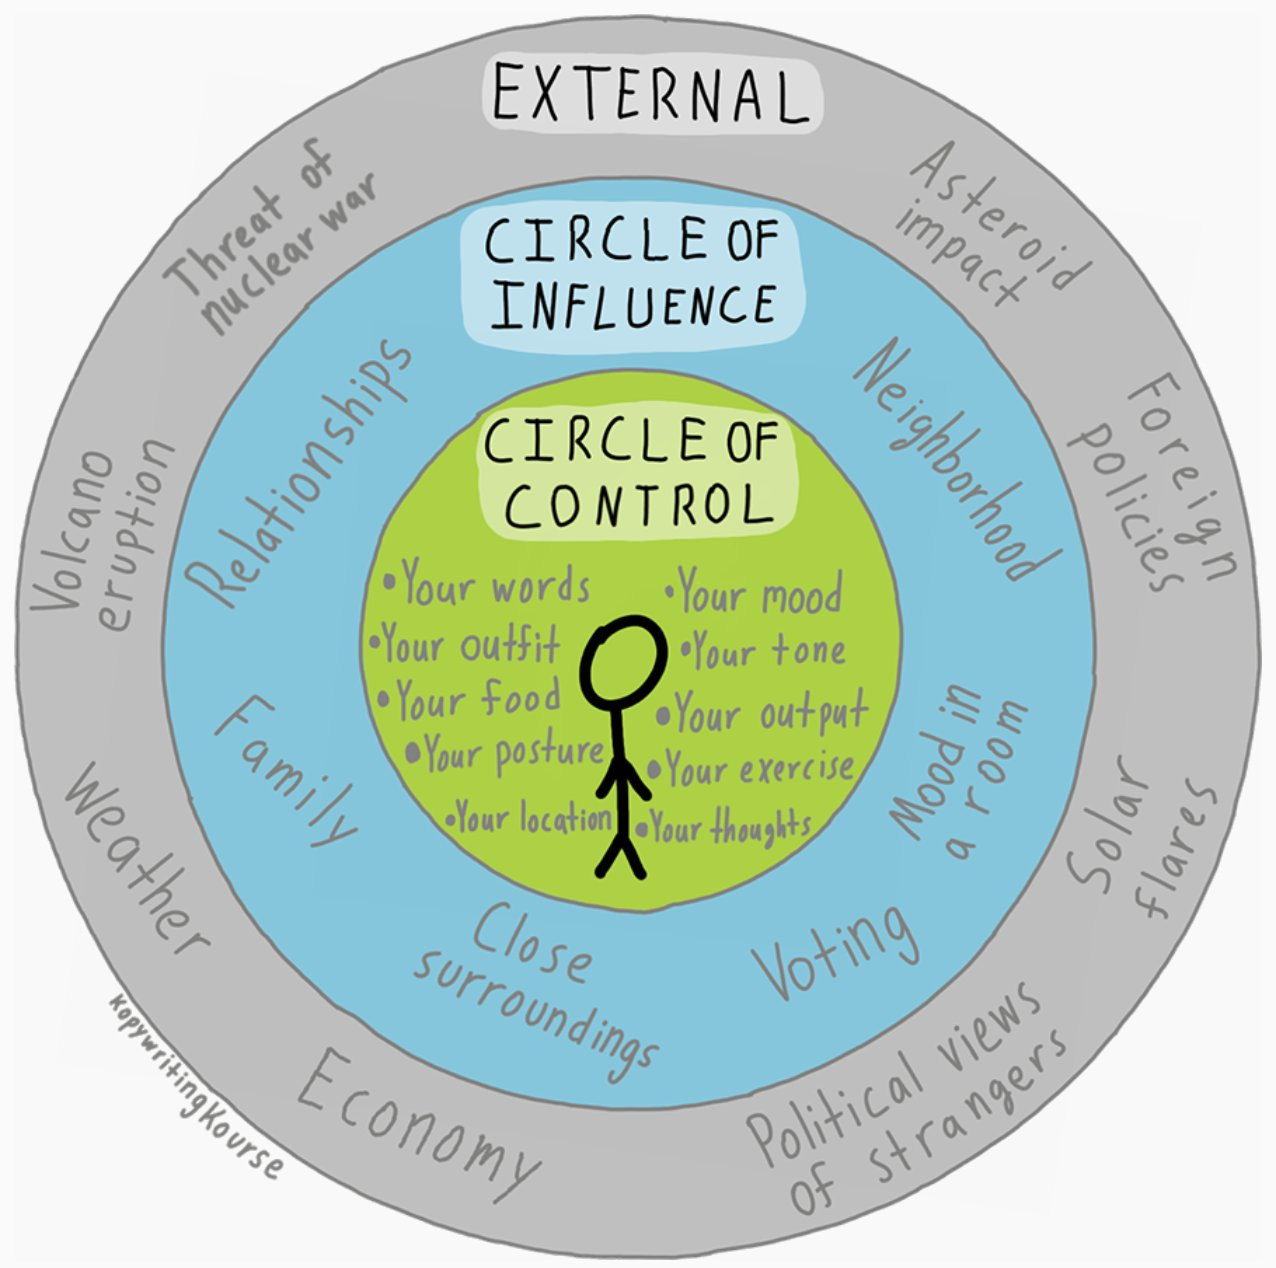 Neville Medhora on Twitter: "The "Circle Of Influence" concept. Circle of  Control: Things you can fully control. Focus on these most. Circle of  Influence: Things you can have an impact on but